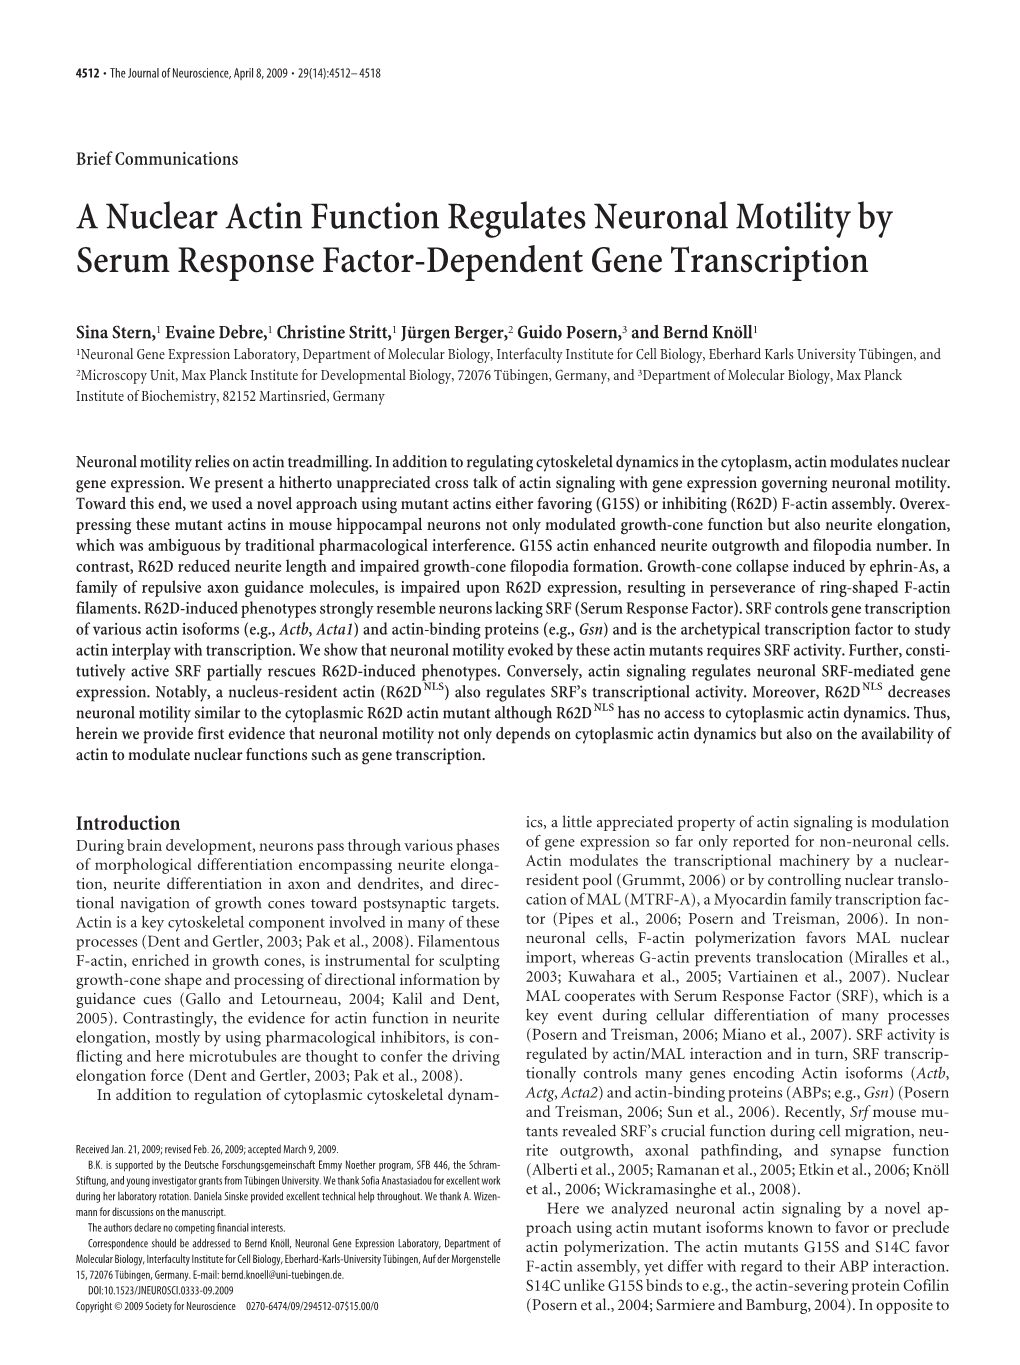 A Nuclear Actin Function Regulates Neuronal Motility by Serum Response Factor-Dependent Gene Transcription